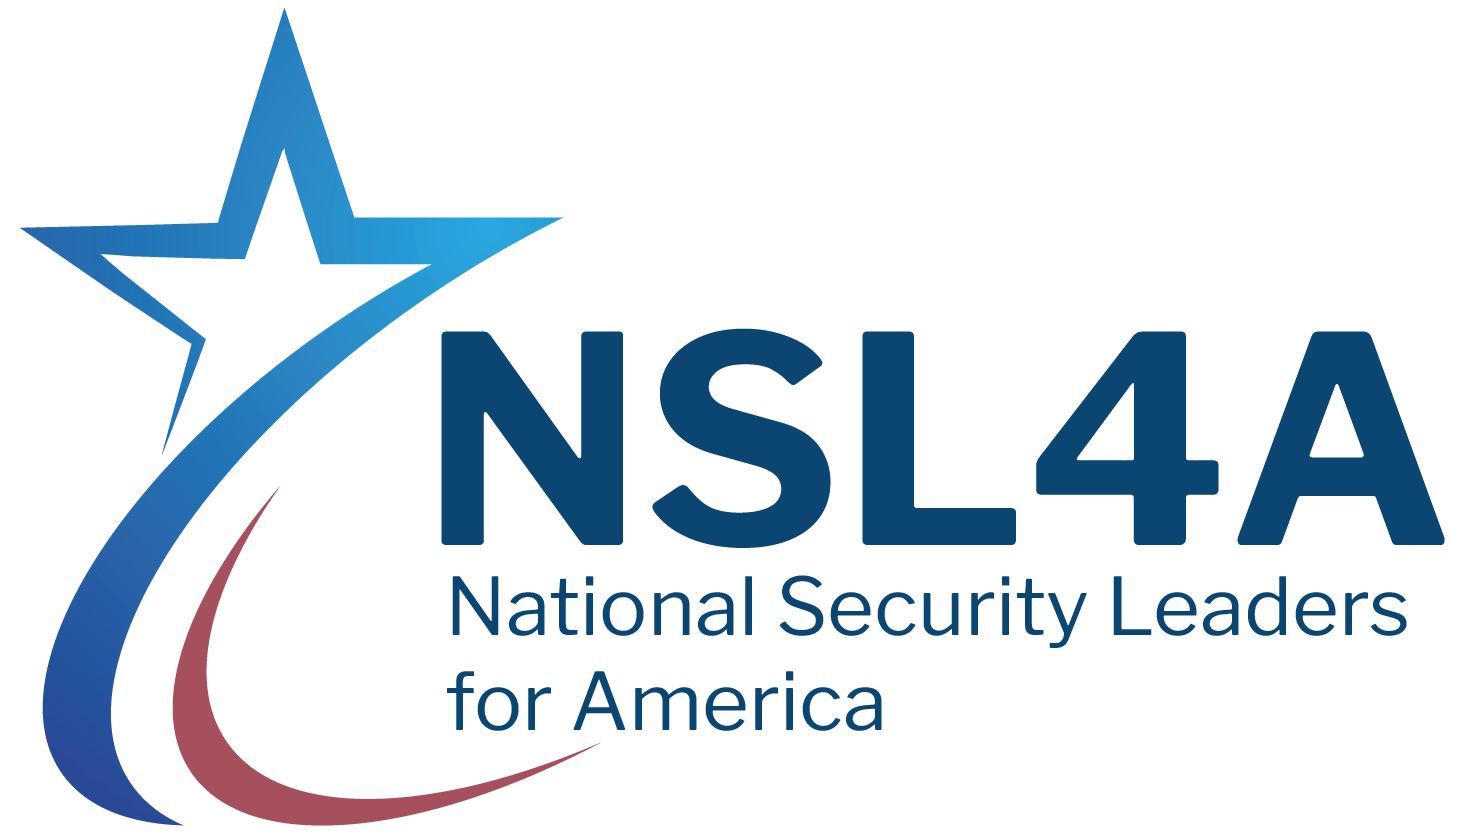 National Security Leaders for America